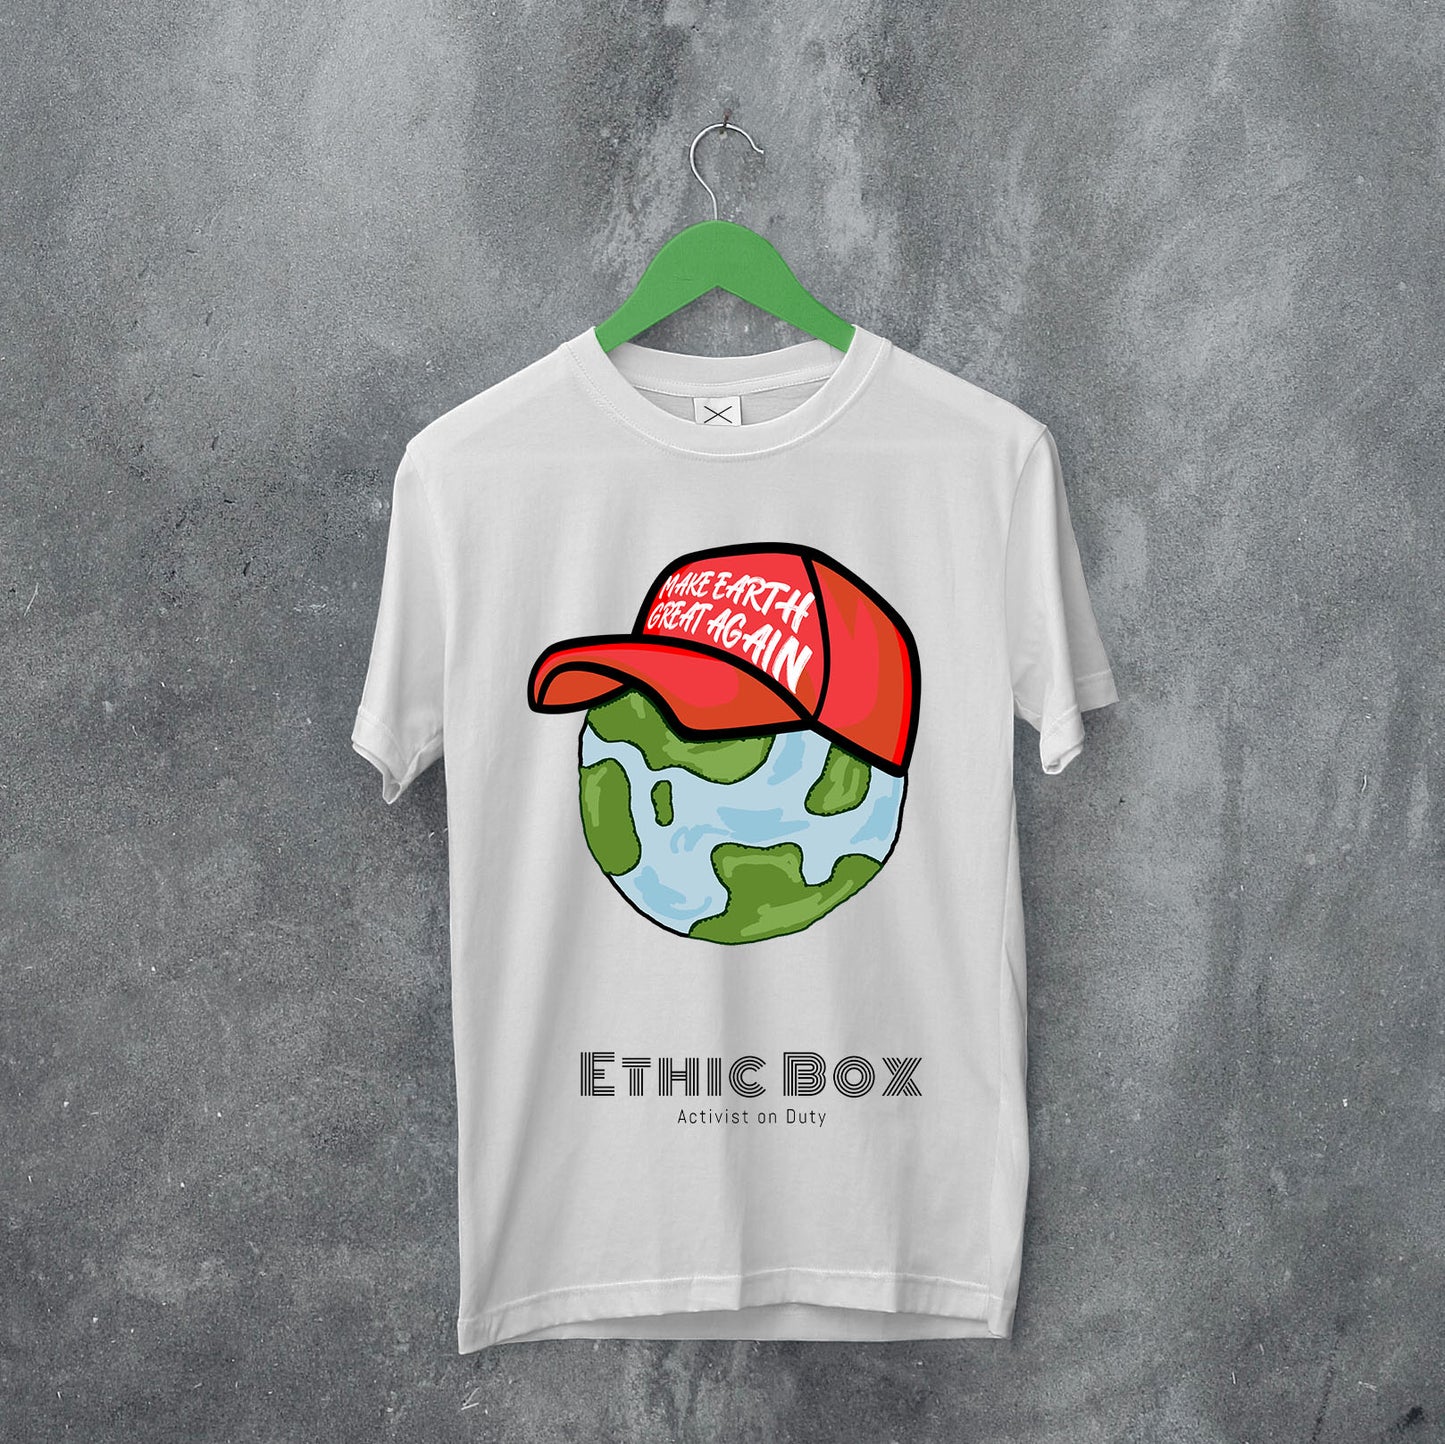 Make Earth Great Again - Unisex fit